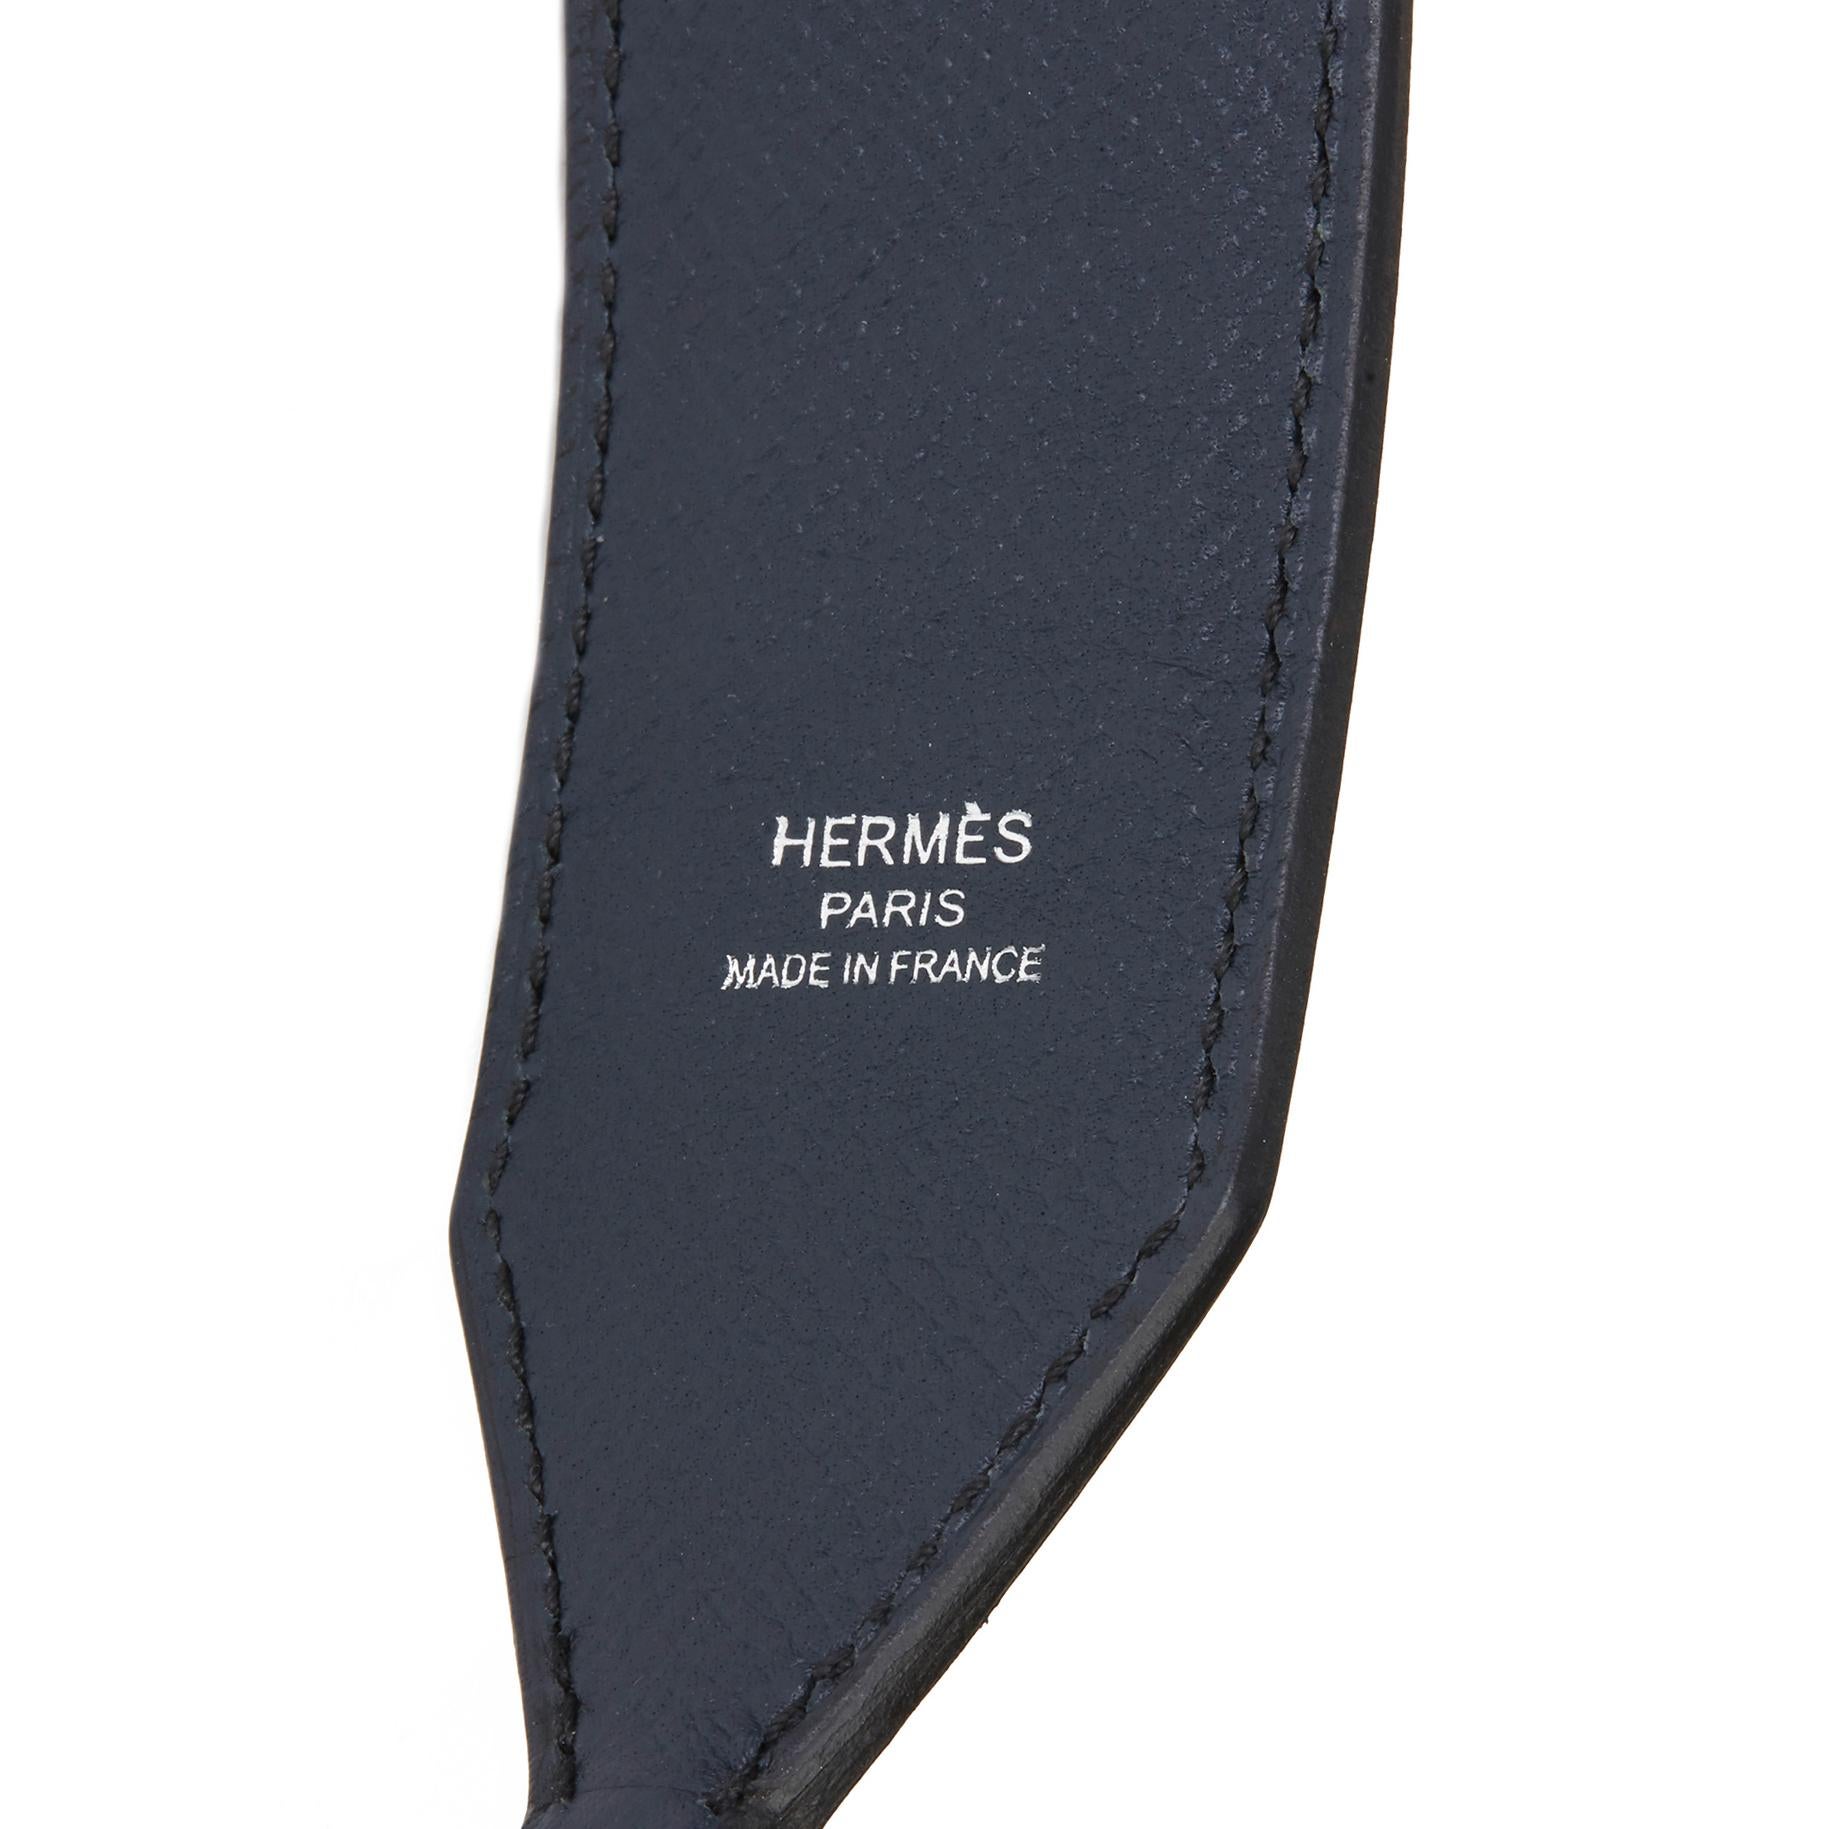 HERMÈS
Bleu Indigo, Lime & Rose Extreme Epsom Leather Tressage 40mm Bag Strap

Xupes Reference: SKHB016
Serial Number: C
Age (Circa): 2018
Accompanied By: Hermès Box
Authenticity Details: Date Stamp (Made in France)
Gender: Ladies
Type: